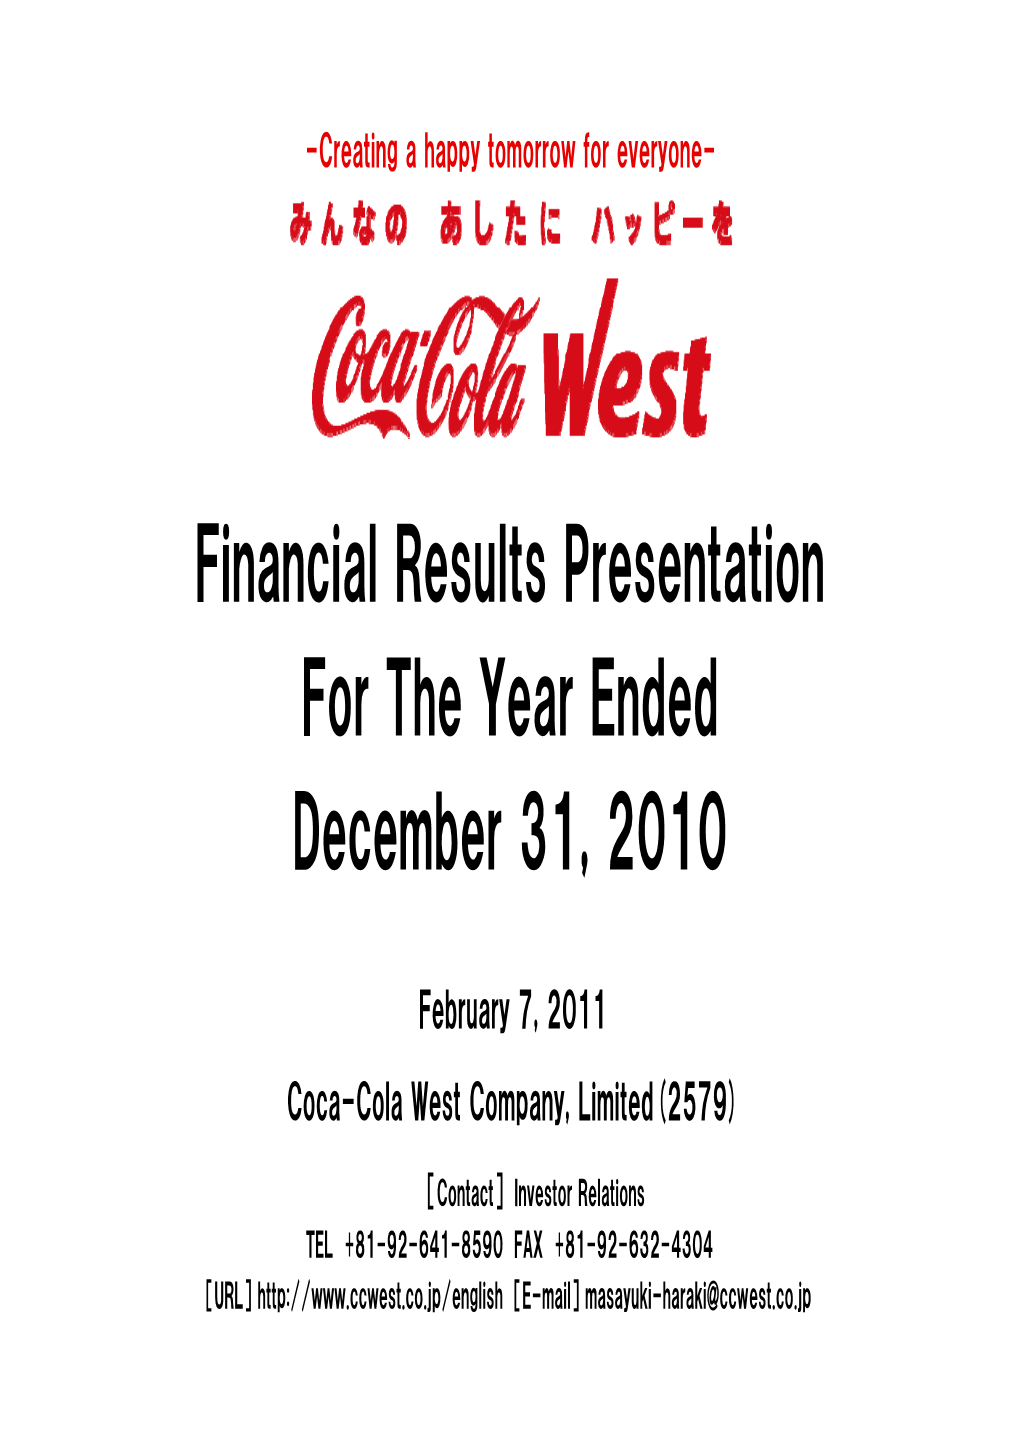 Financial Results Presentation for the Year Ended December 31, 2010